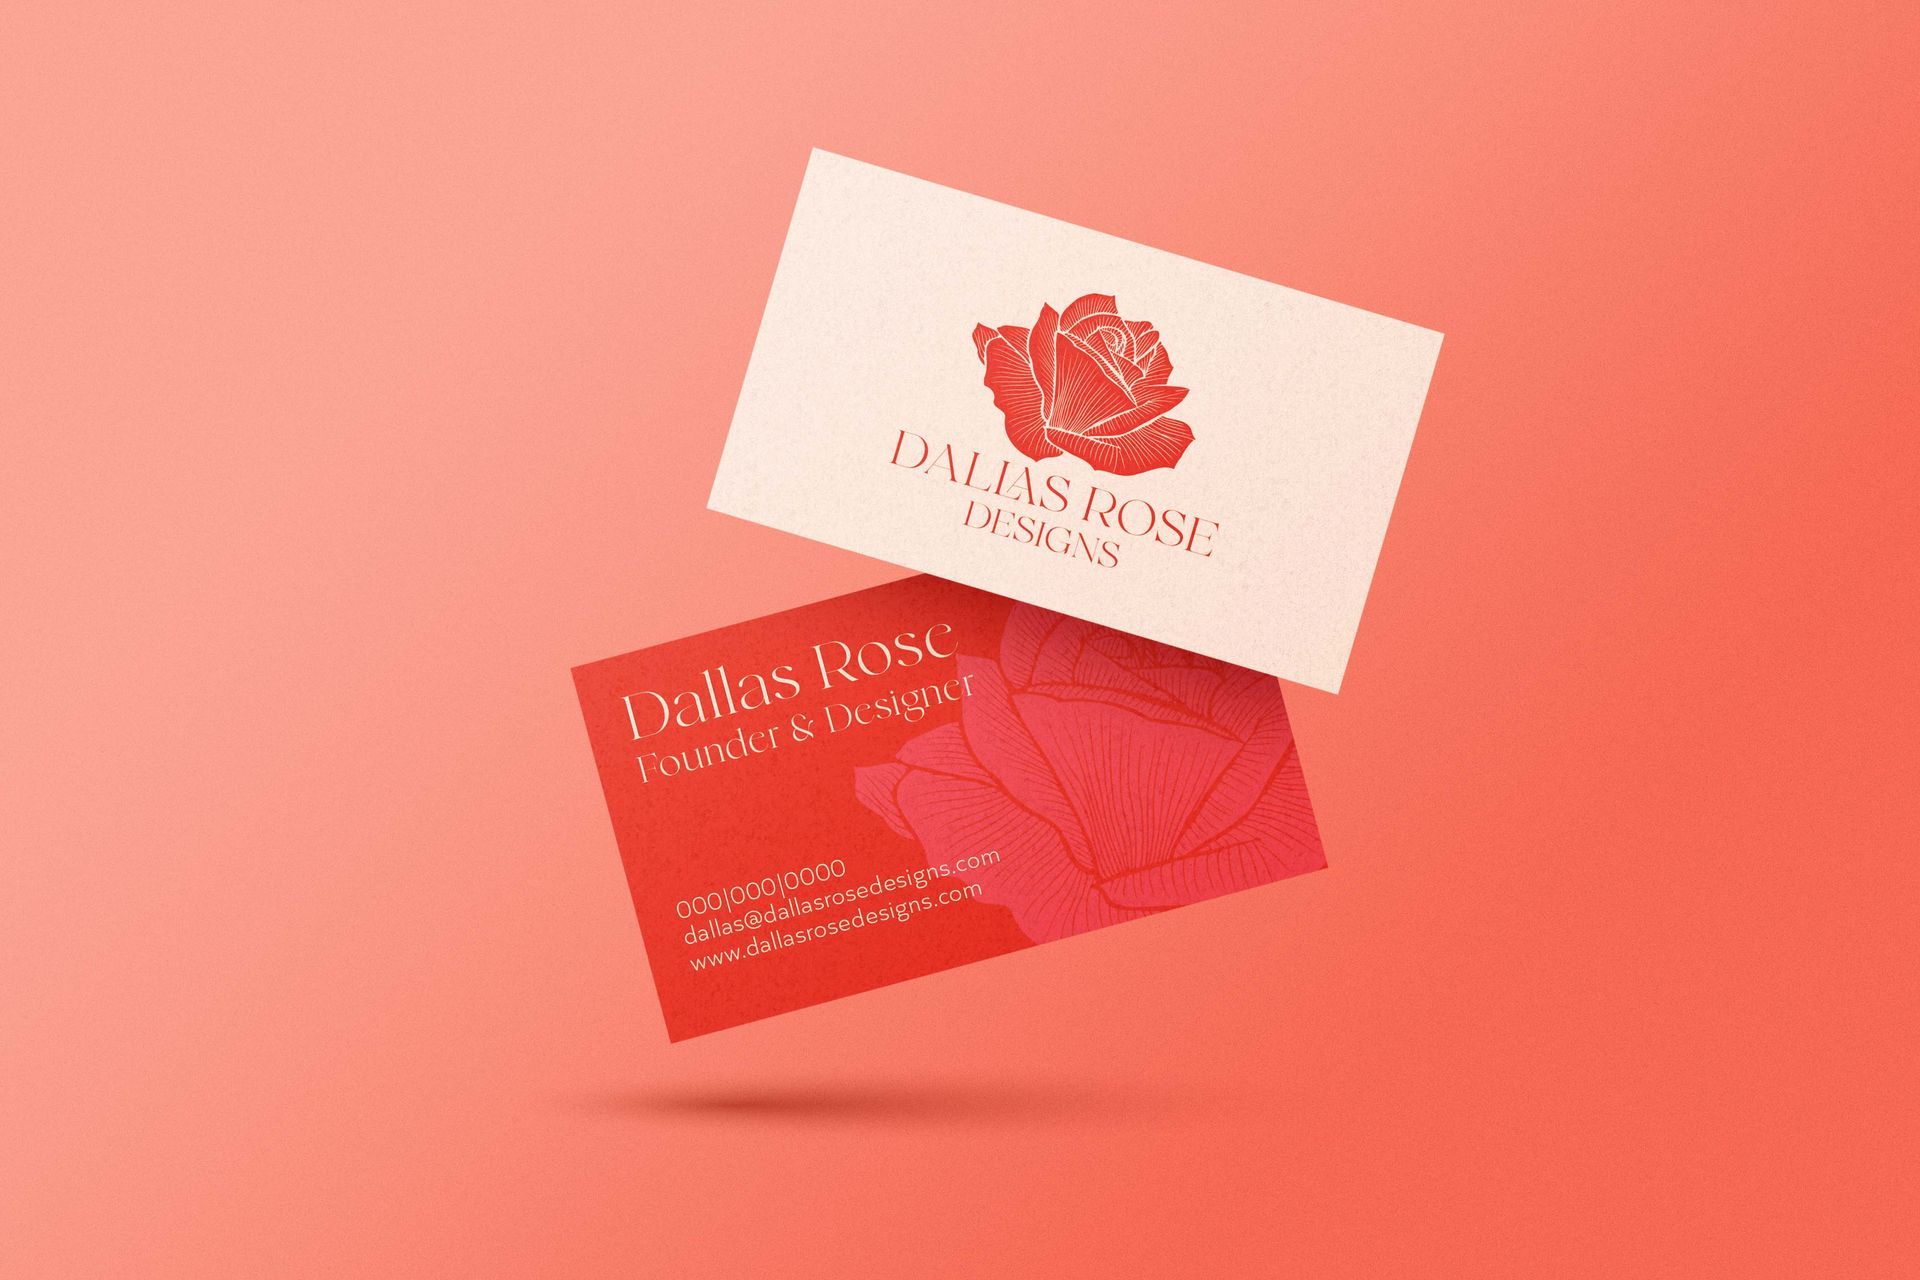 A business card with a red rose on it is floating in the air.